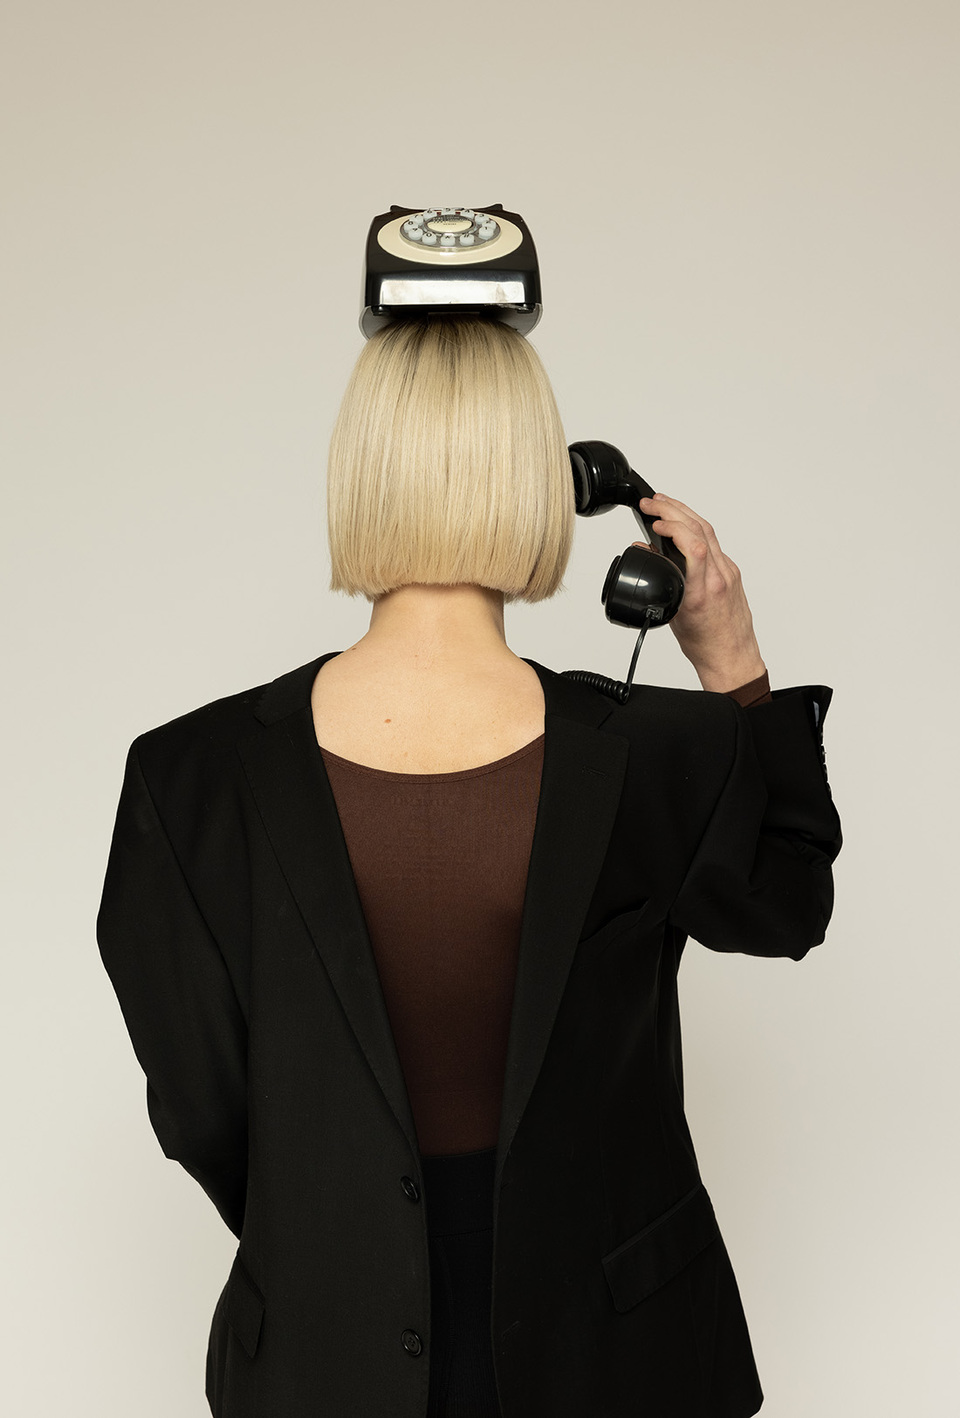 Rear view of a woman with black dress on backwards and old style bakelite telephone on top of her head, holds the receiver to the back of her head